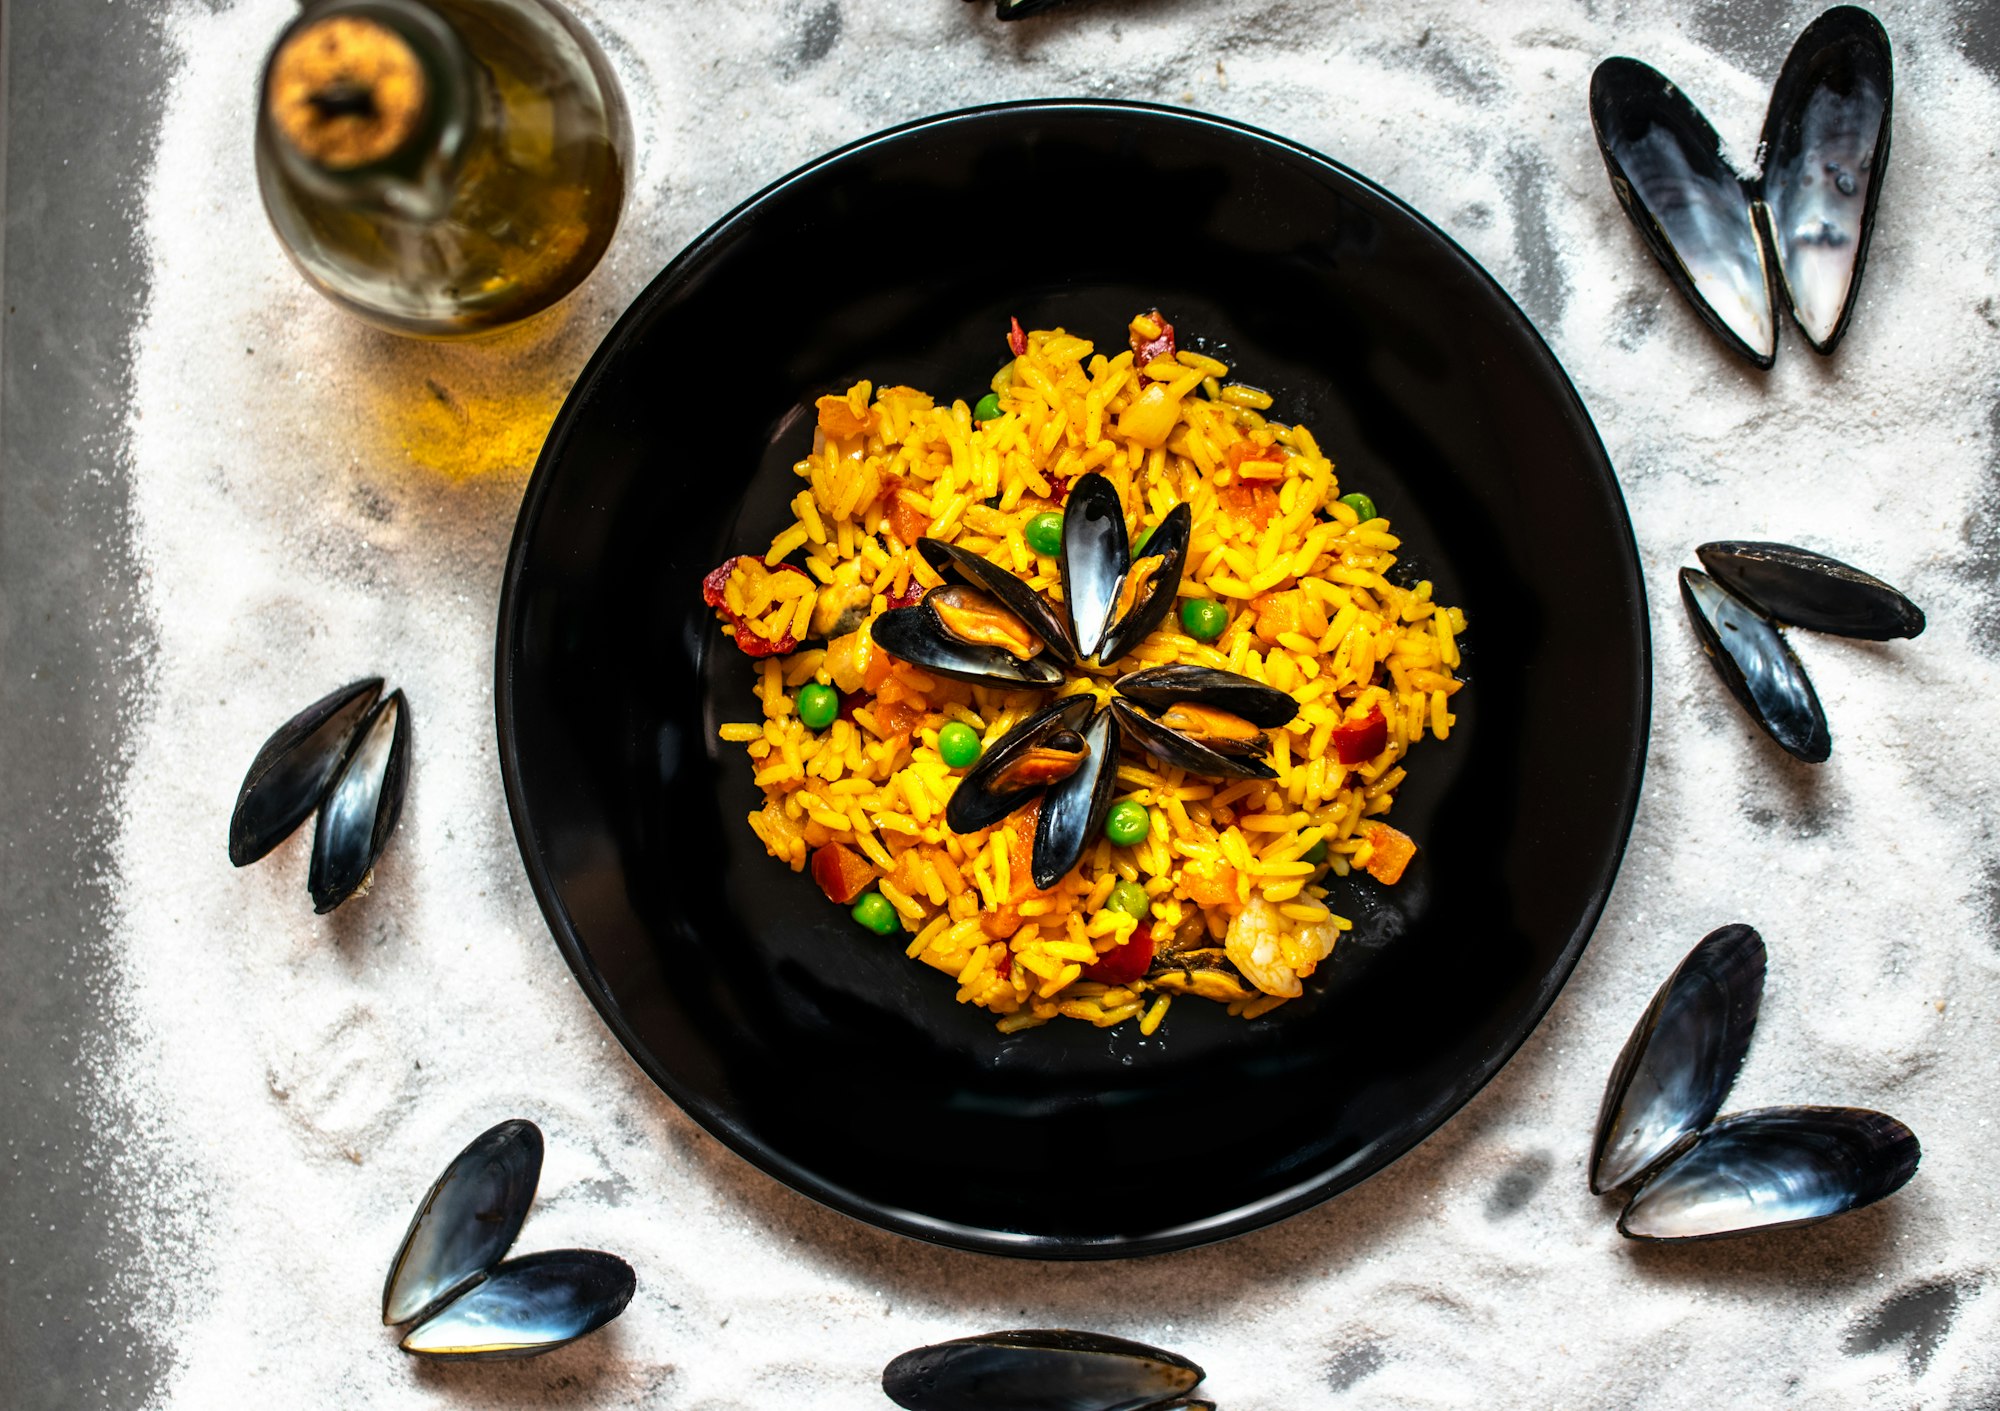 Paella and the chemistry behind its delicious taste